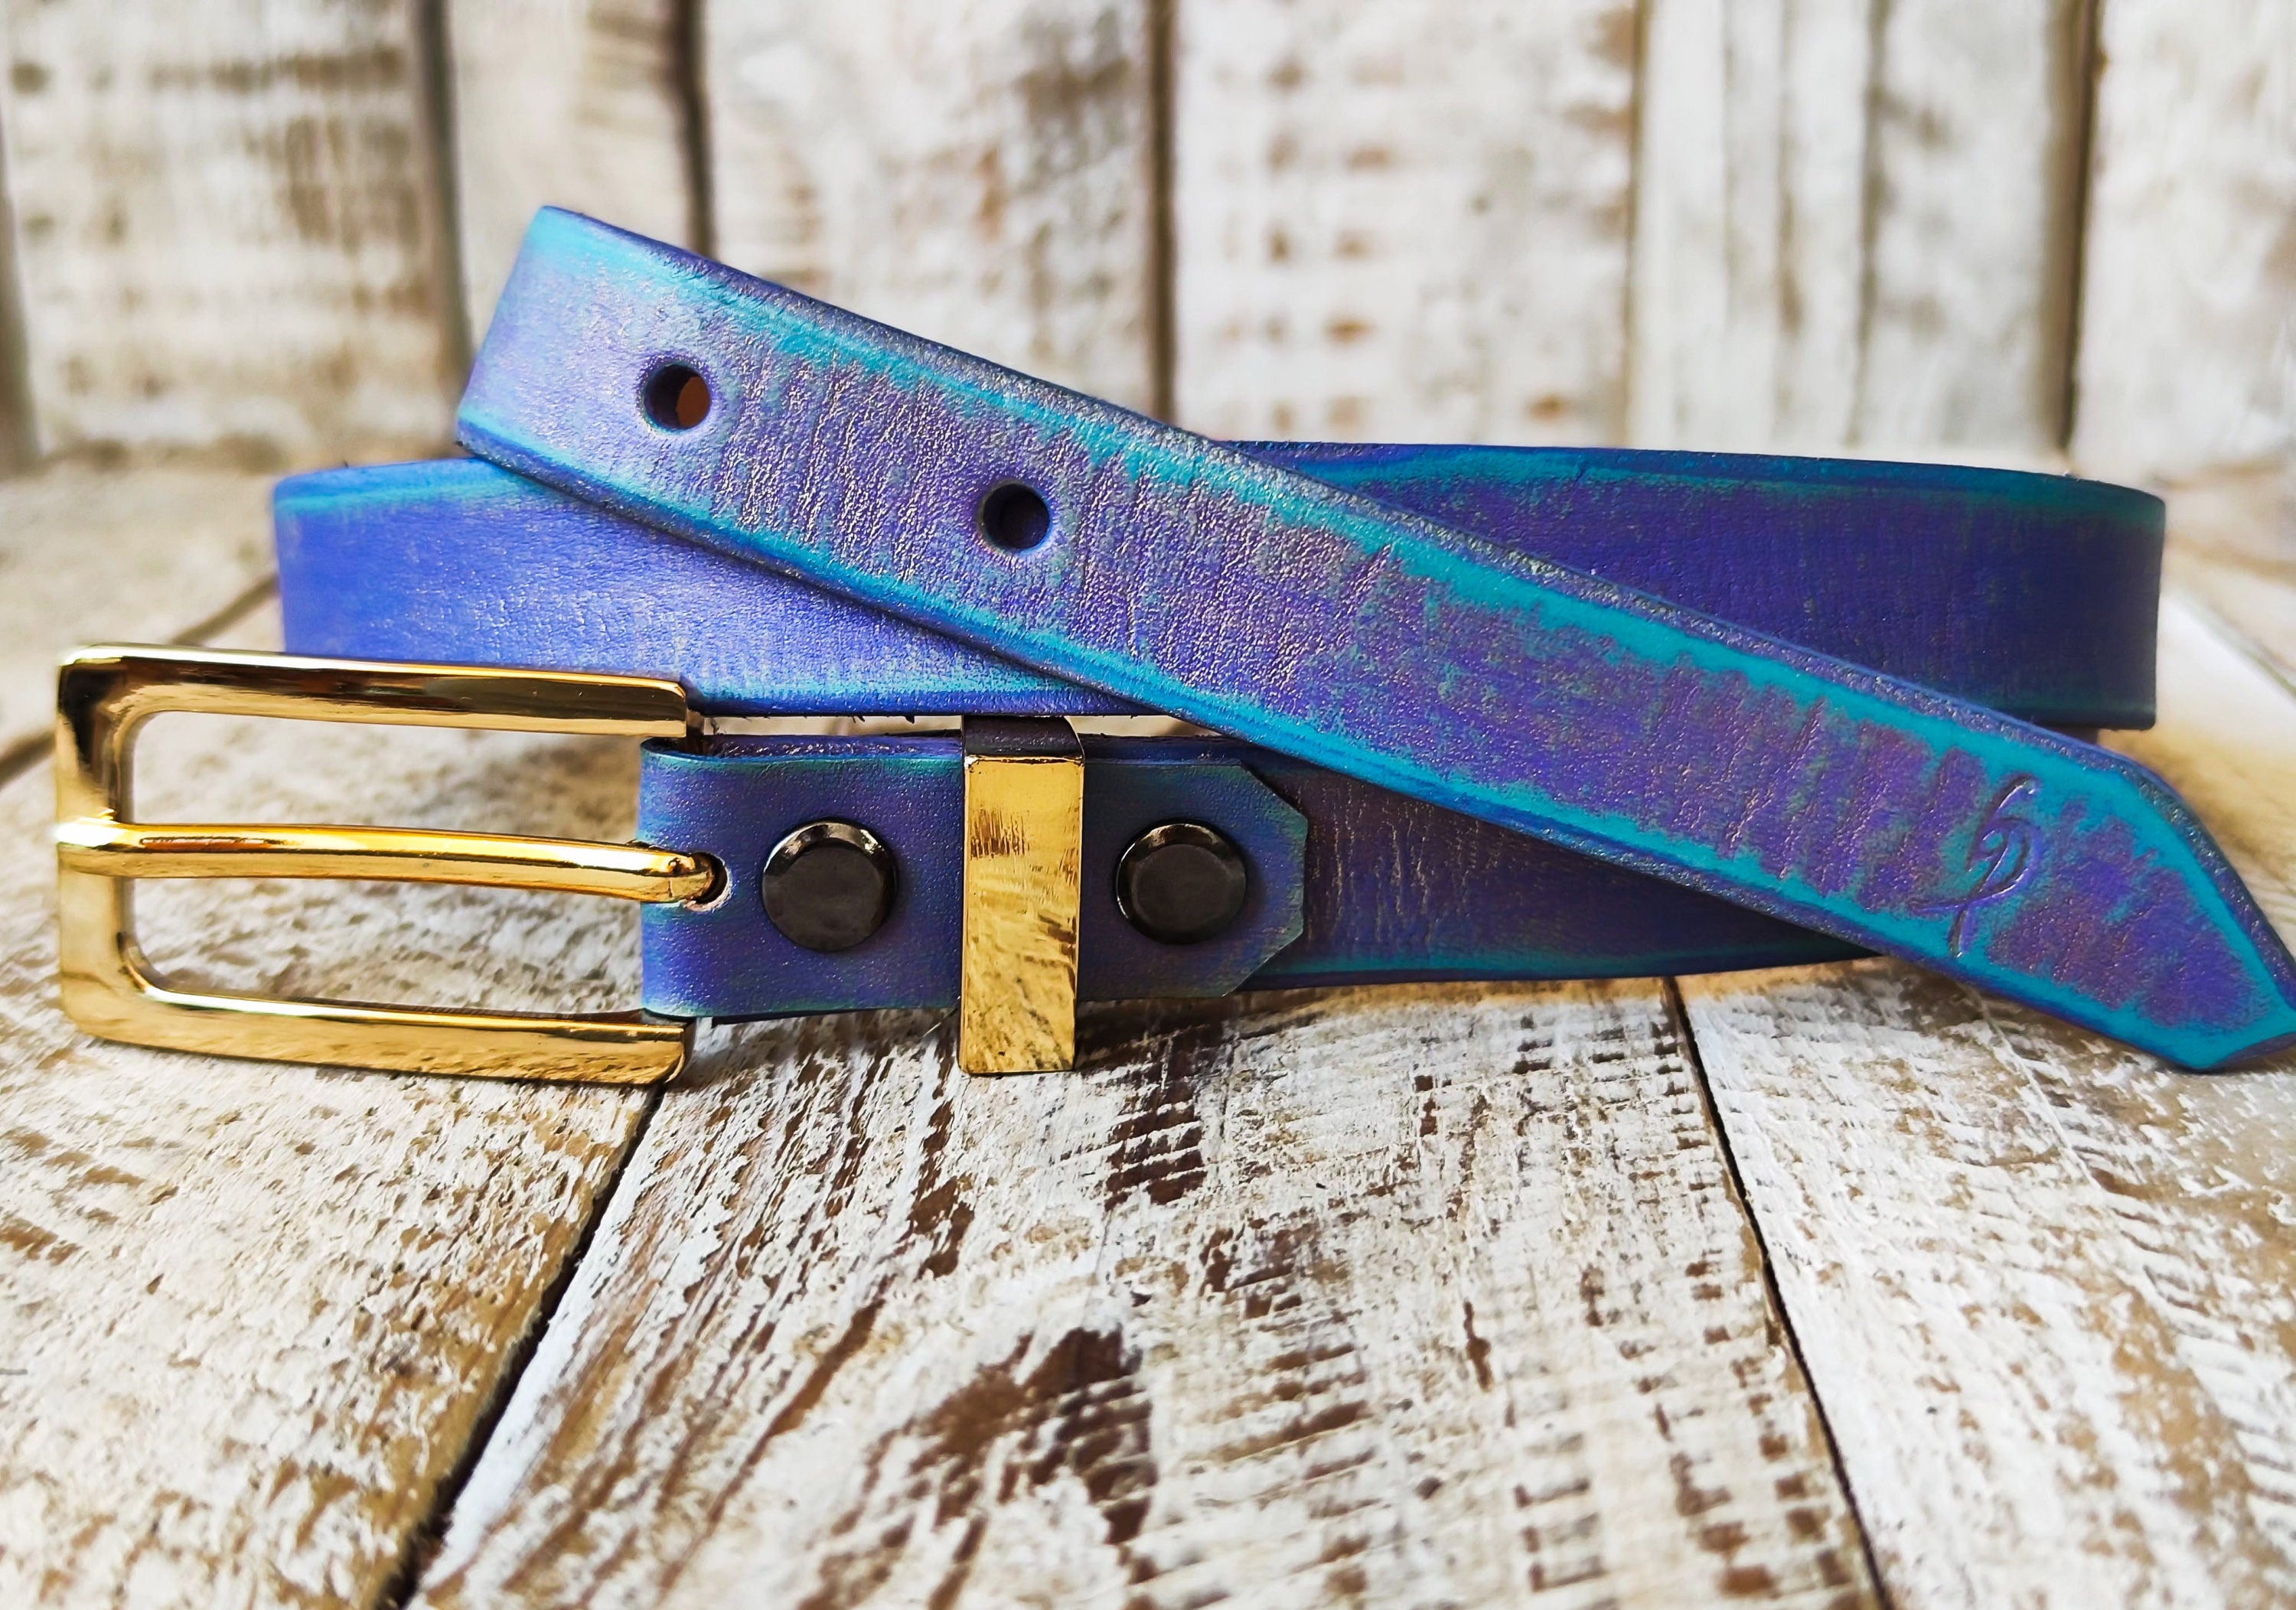 Handcrafted Narrow 2cm purple Leather Belt with turquoise wash and golden finish attaches to  Gold Buckle for Women, Elegant design